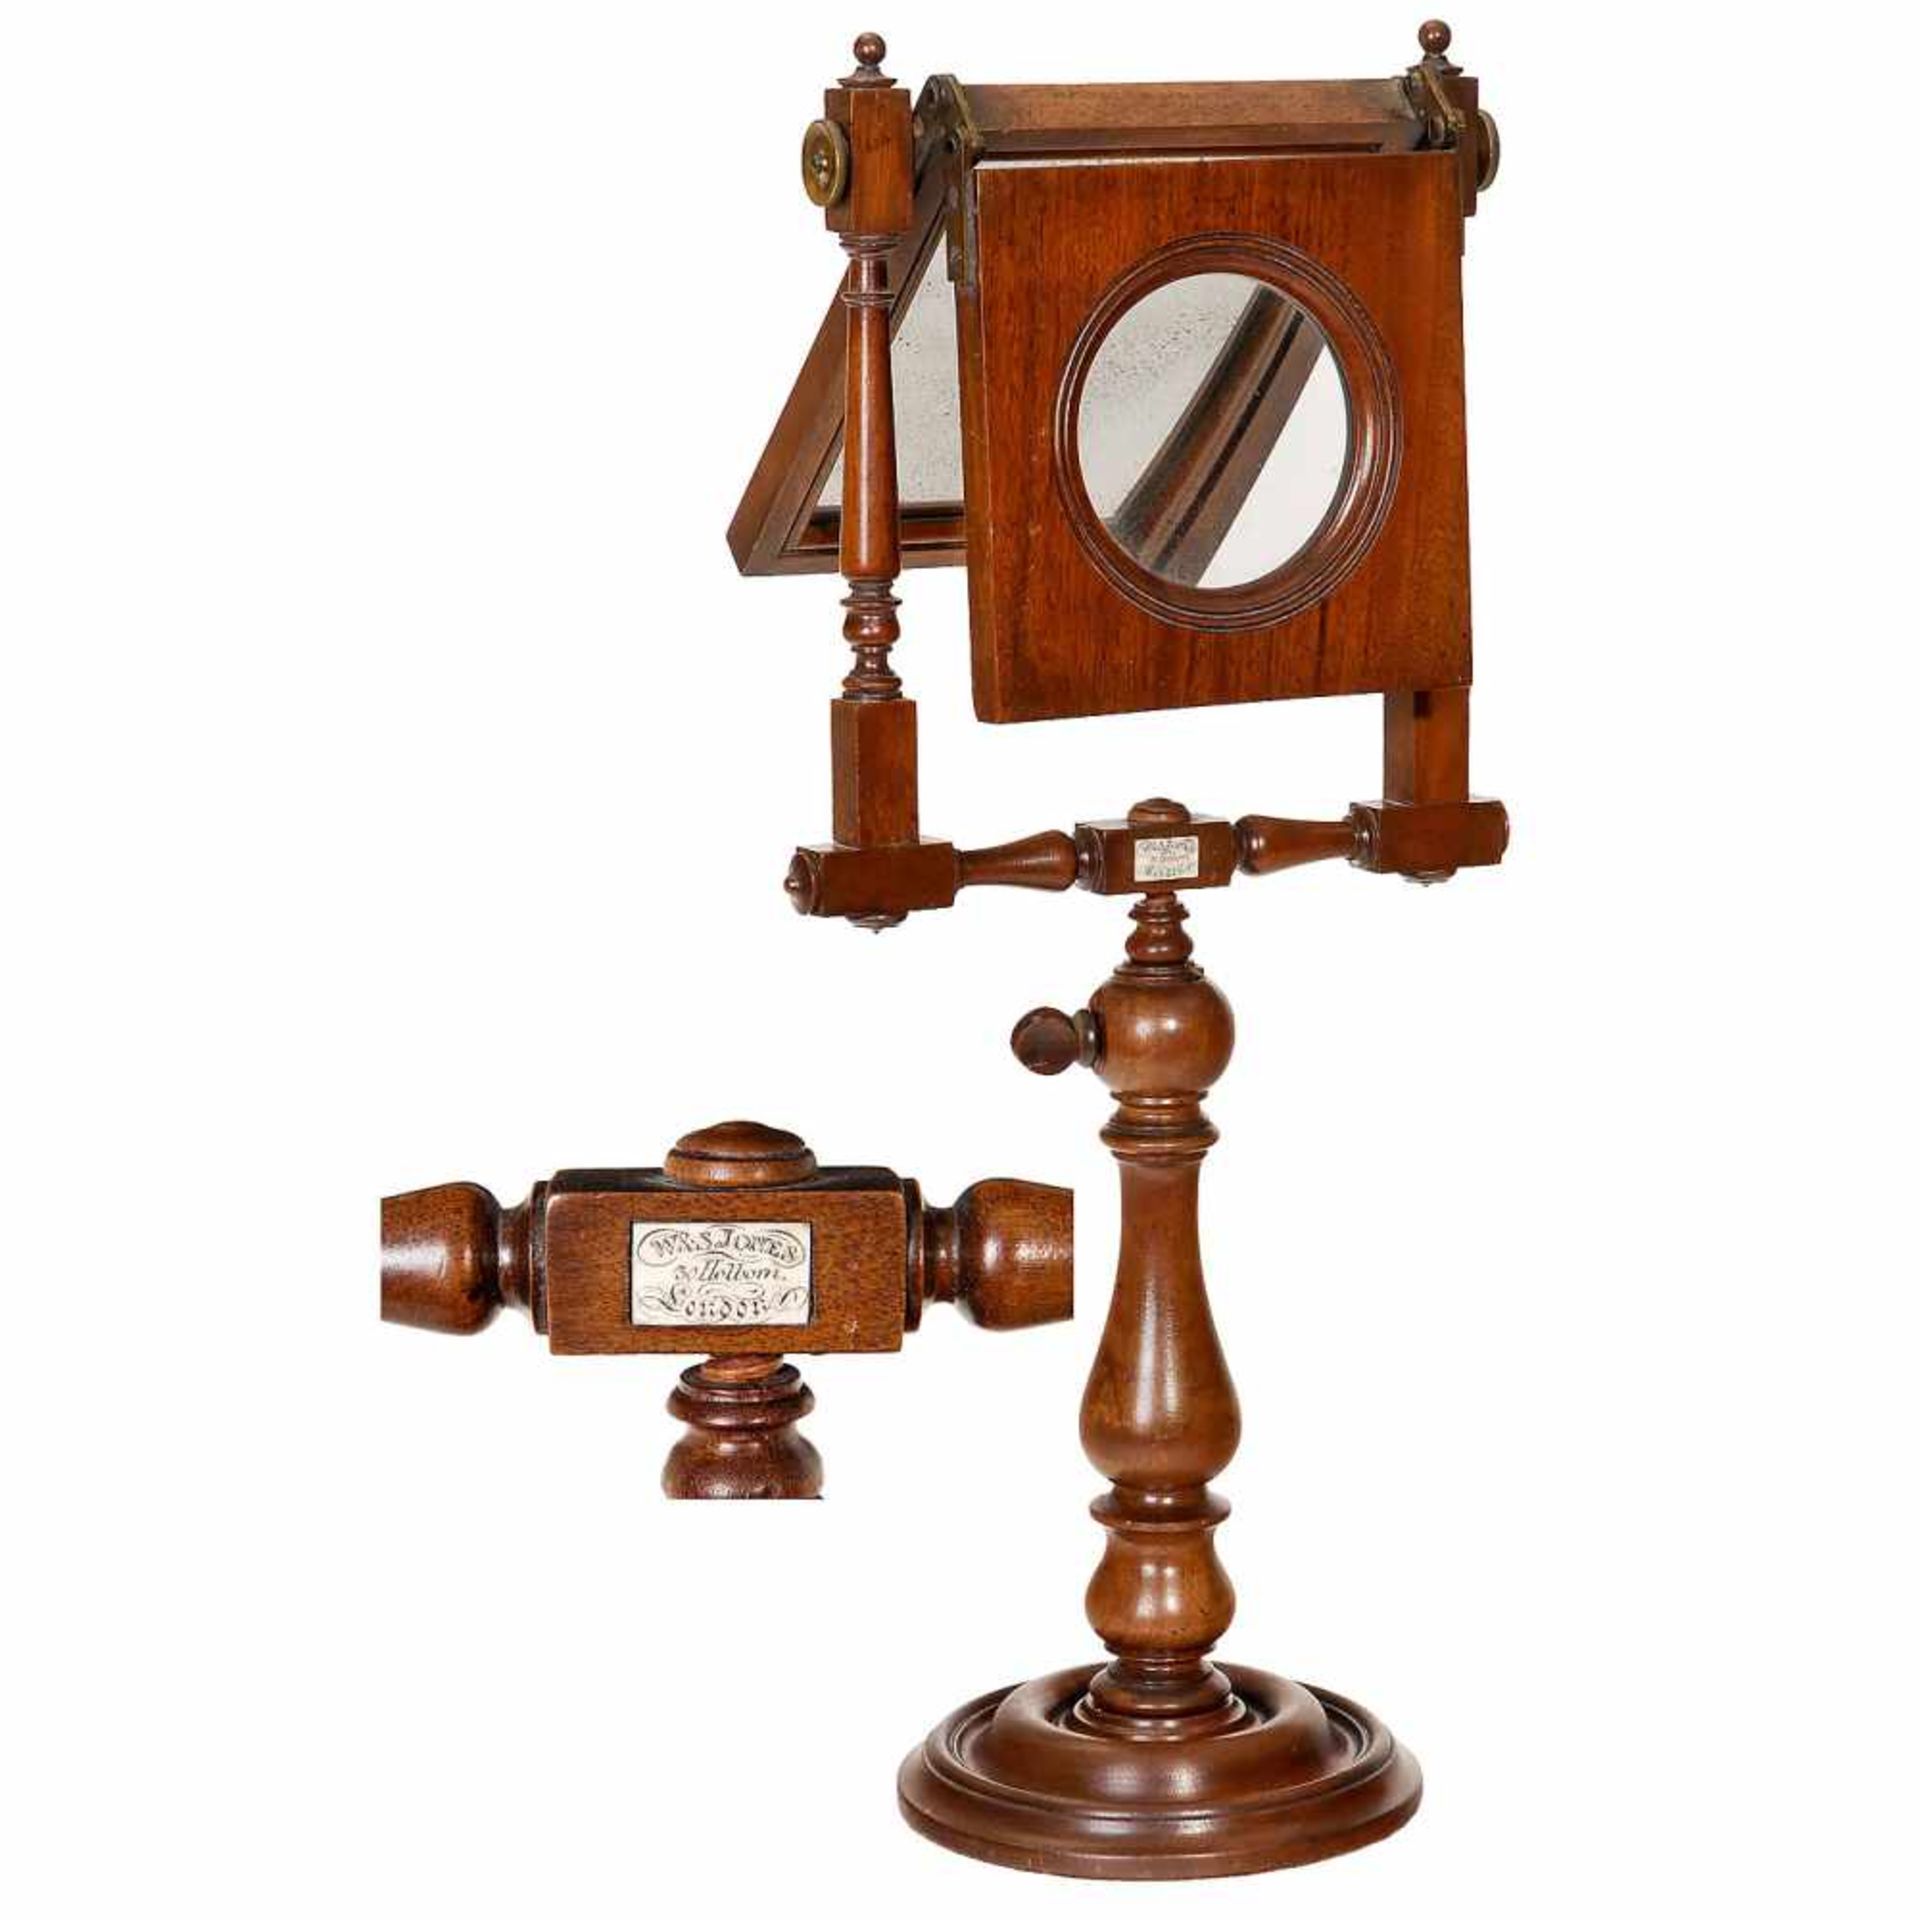 Early Zograscope, c. 1800W. & S. Jones, 30 Holborn, London. Polished wood, height 24 in., lens